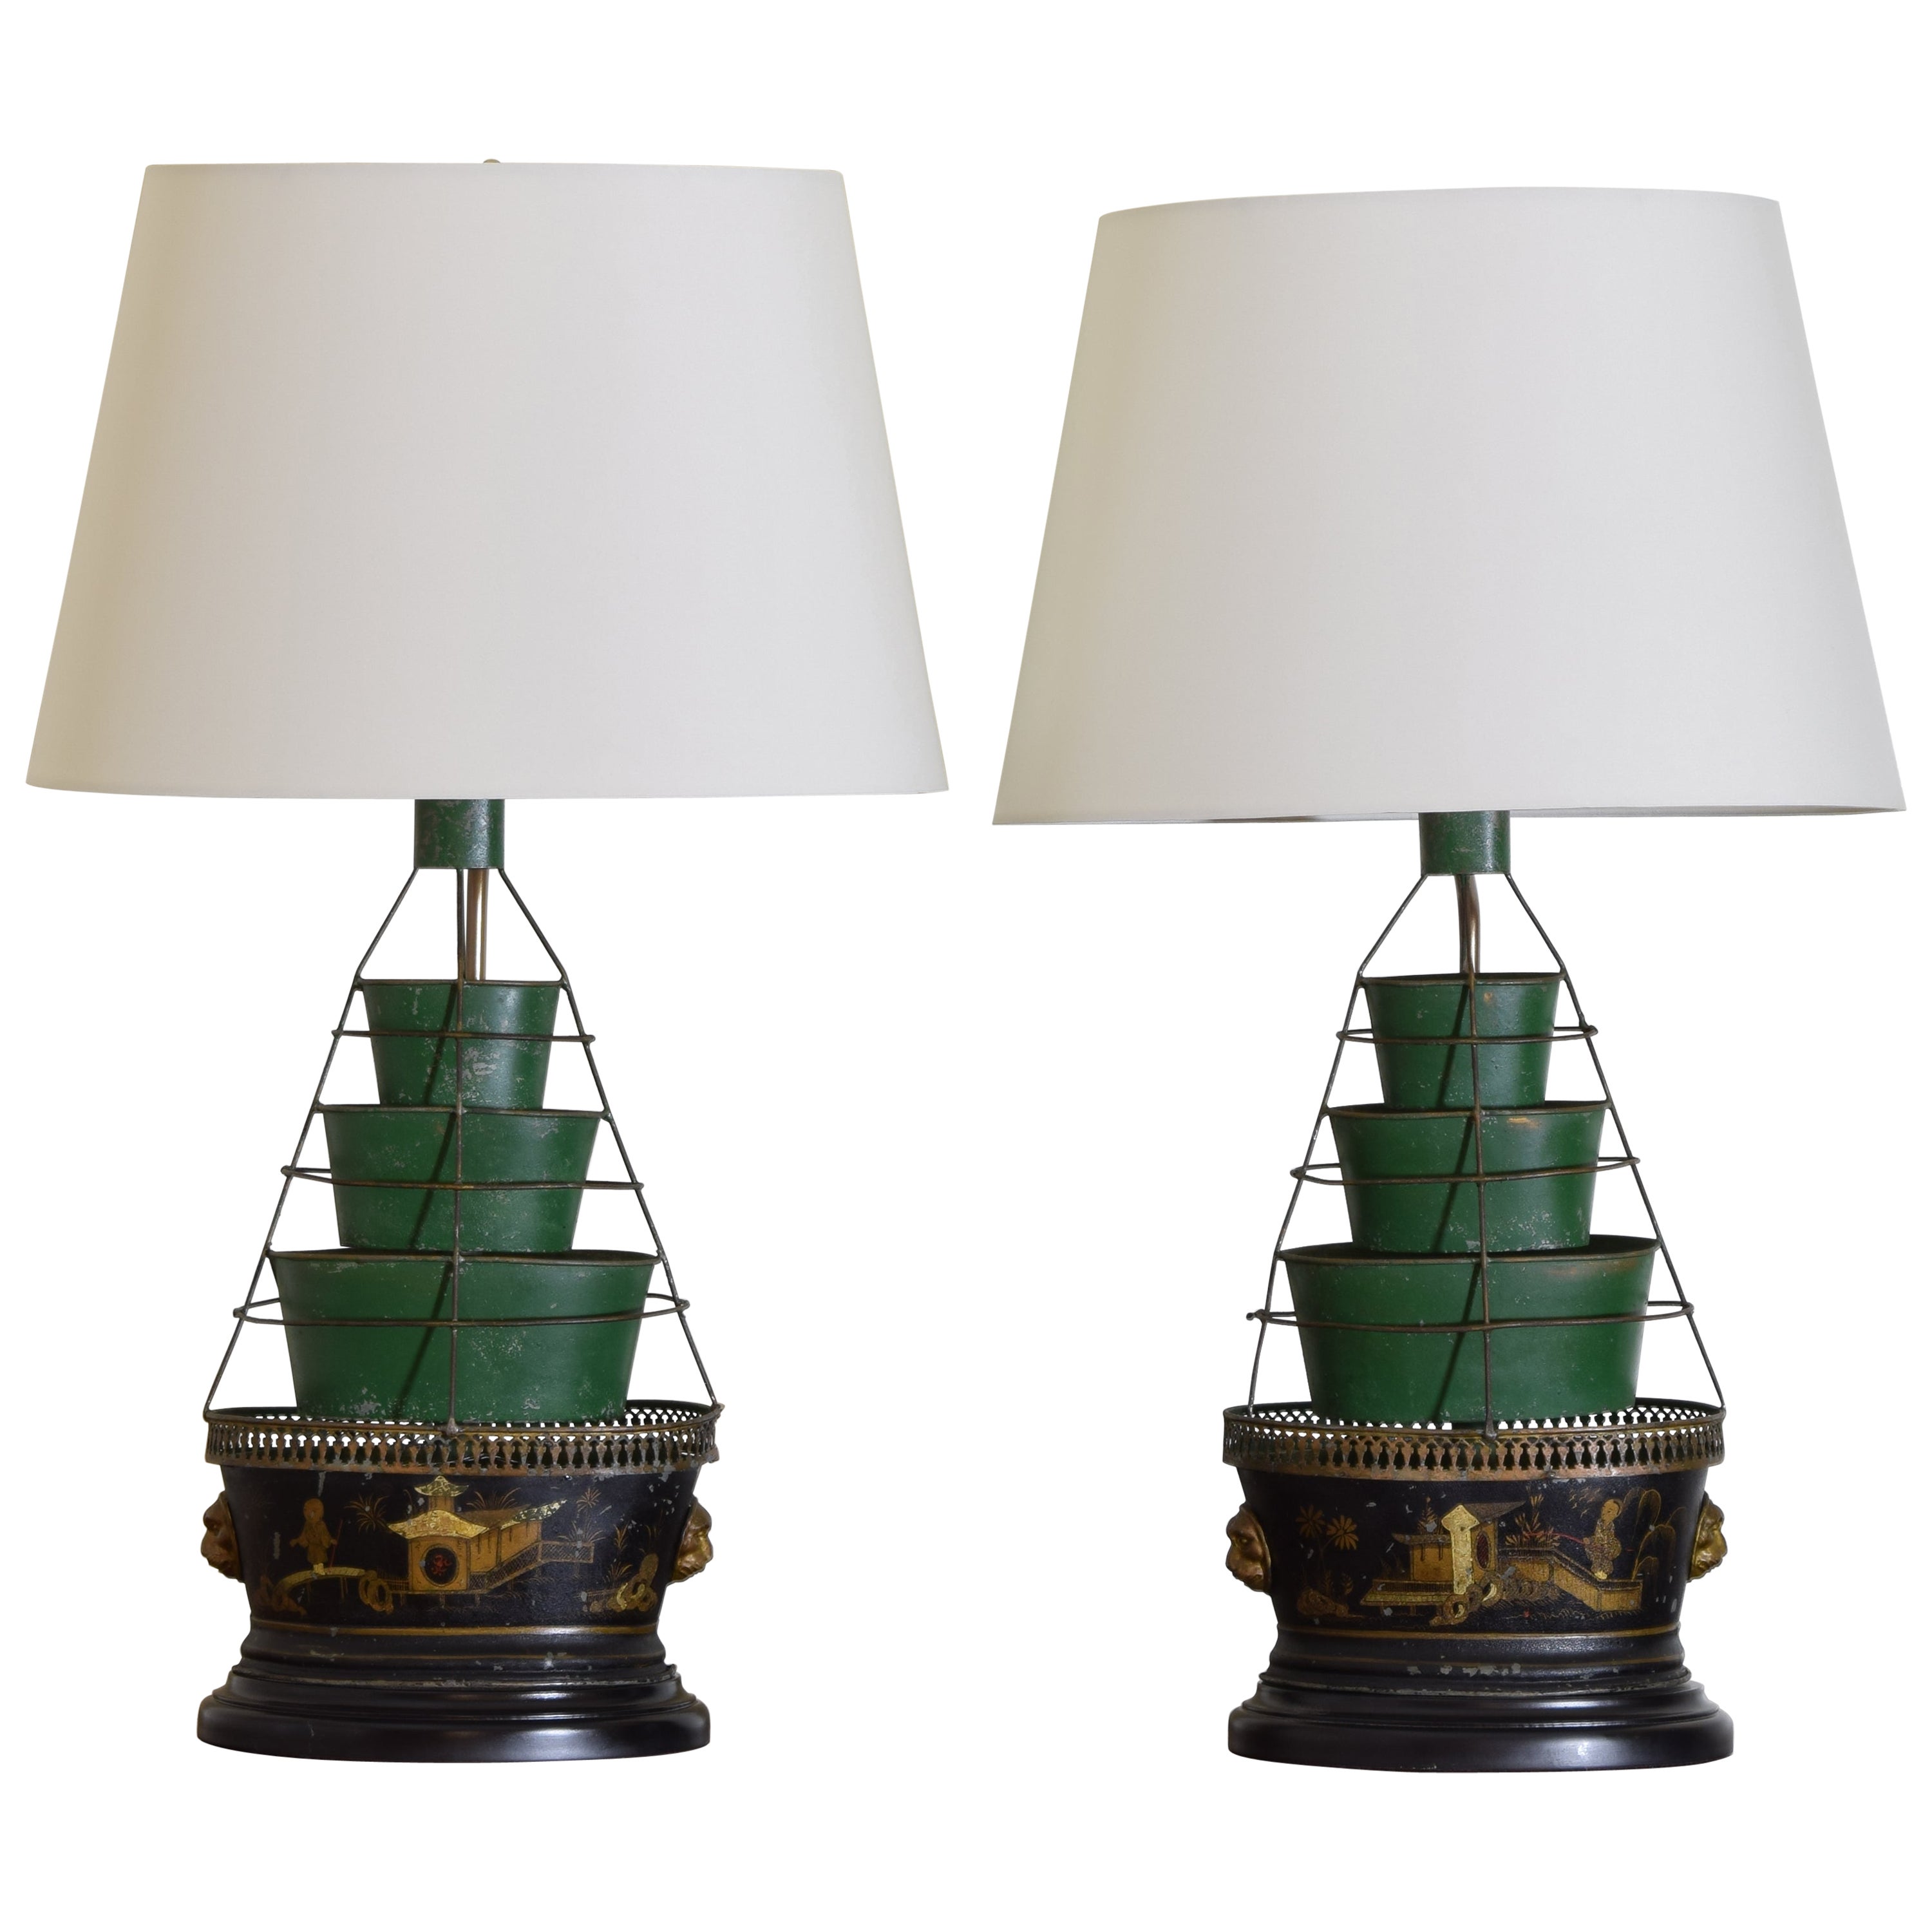 Pair of Tole Chinoiserie Tulip Jardinieres Mounted as Table Lamps, early 20thc